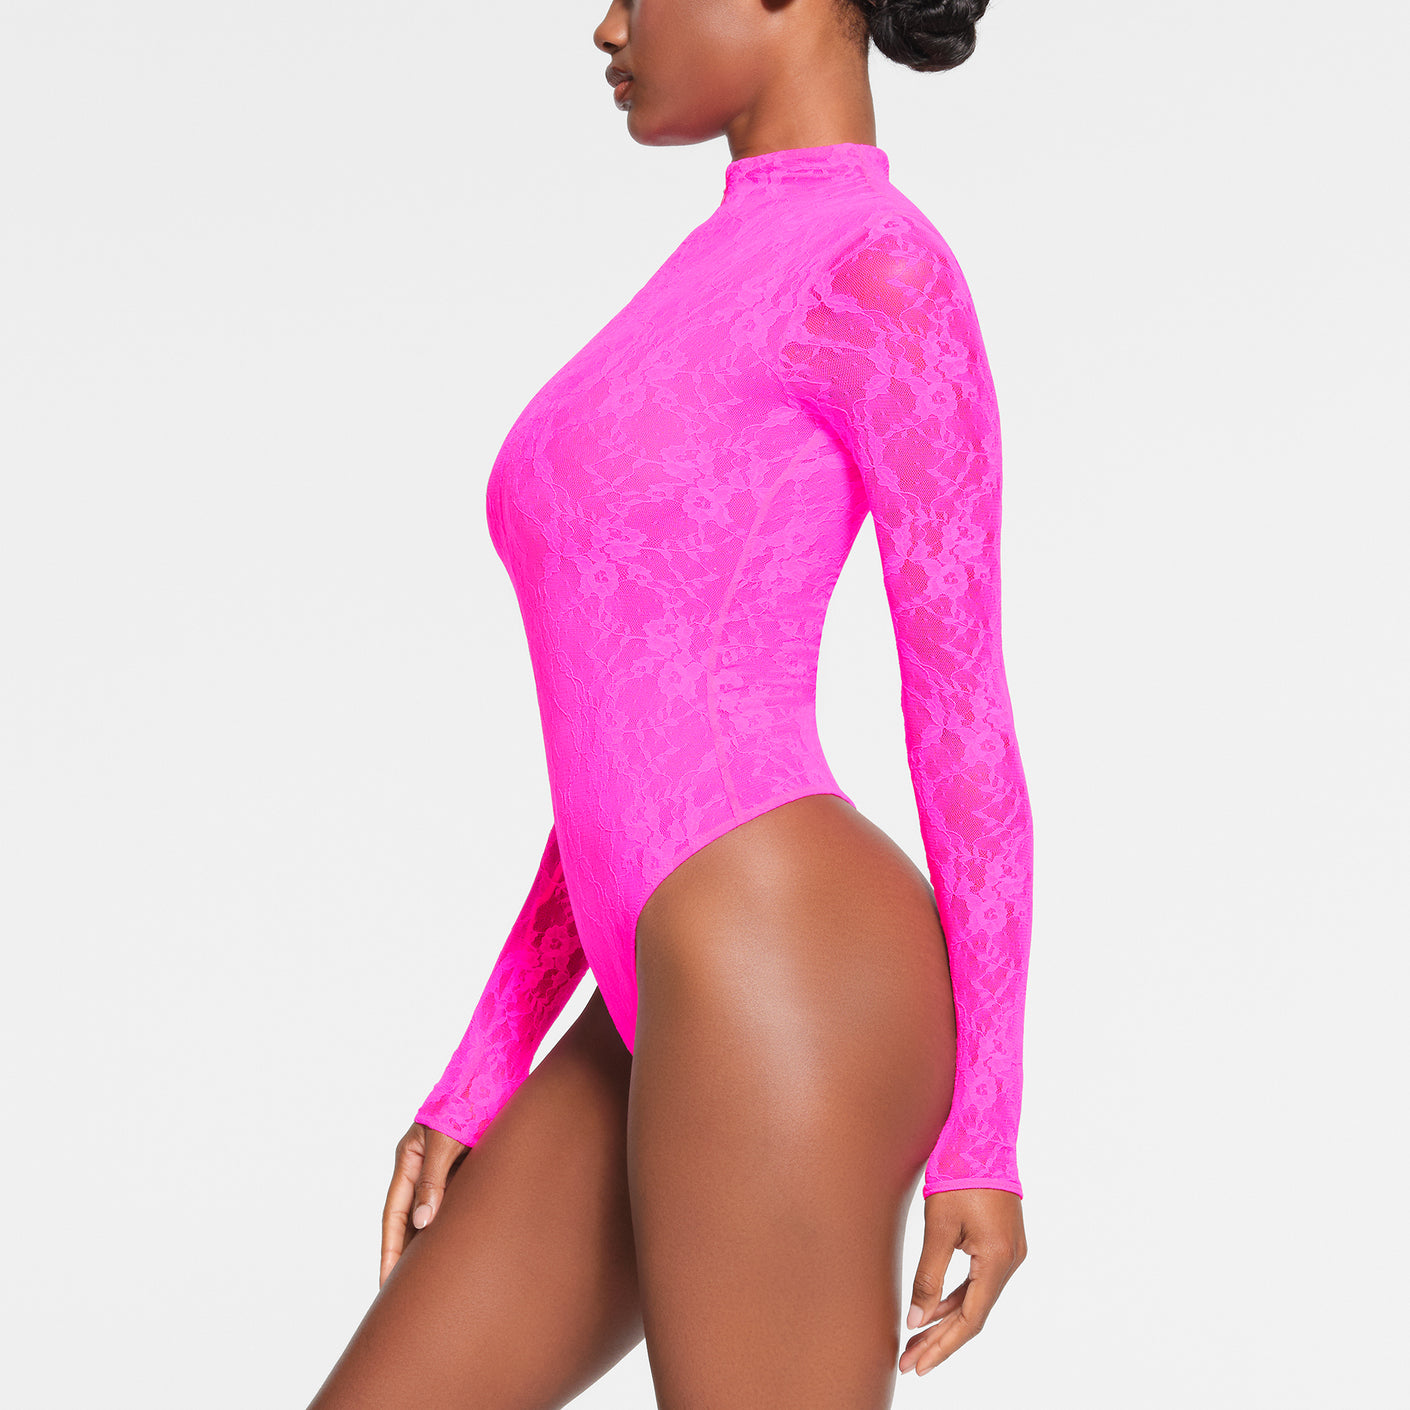 THE KAHLI Thong bodysuit in BLACK AND PINK (limited collection